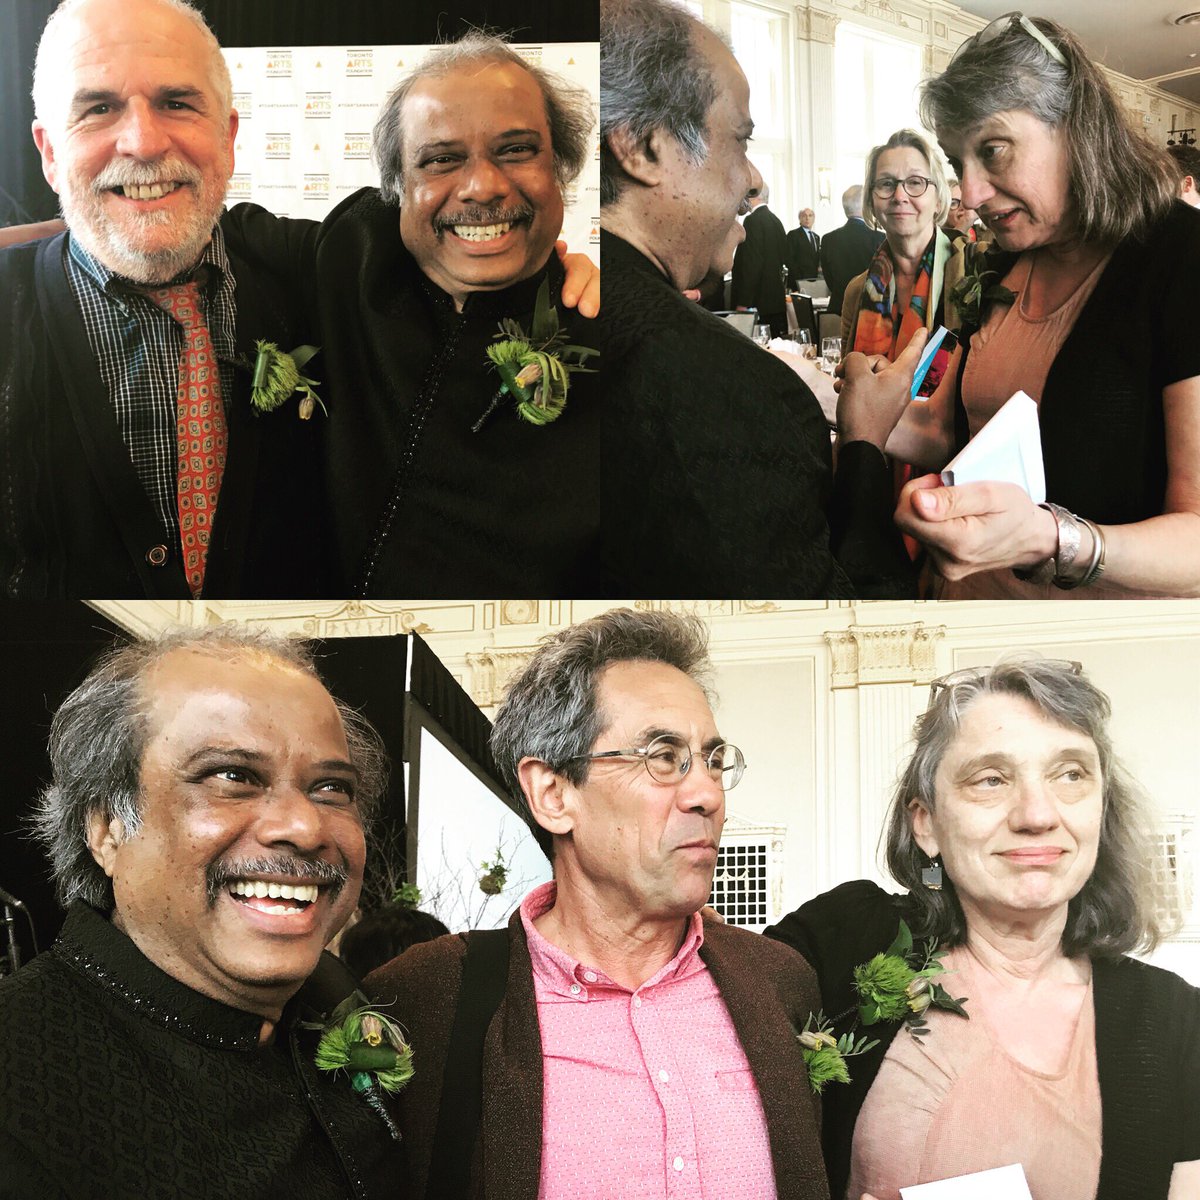 Congrats to all the #TOArtsAwards recipients and finalists, what a great day and inspiring speeches! @jumbliestheatre @TOArtsFdn @rise_edt @jivisawesome @TheWholeNote @JohnTory @melaniejoly @TorontoArts @UforChange @ThePowerPlantTO @MusicworksMag